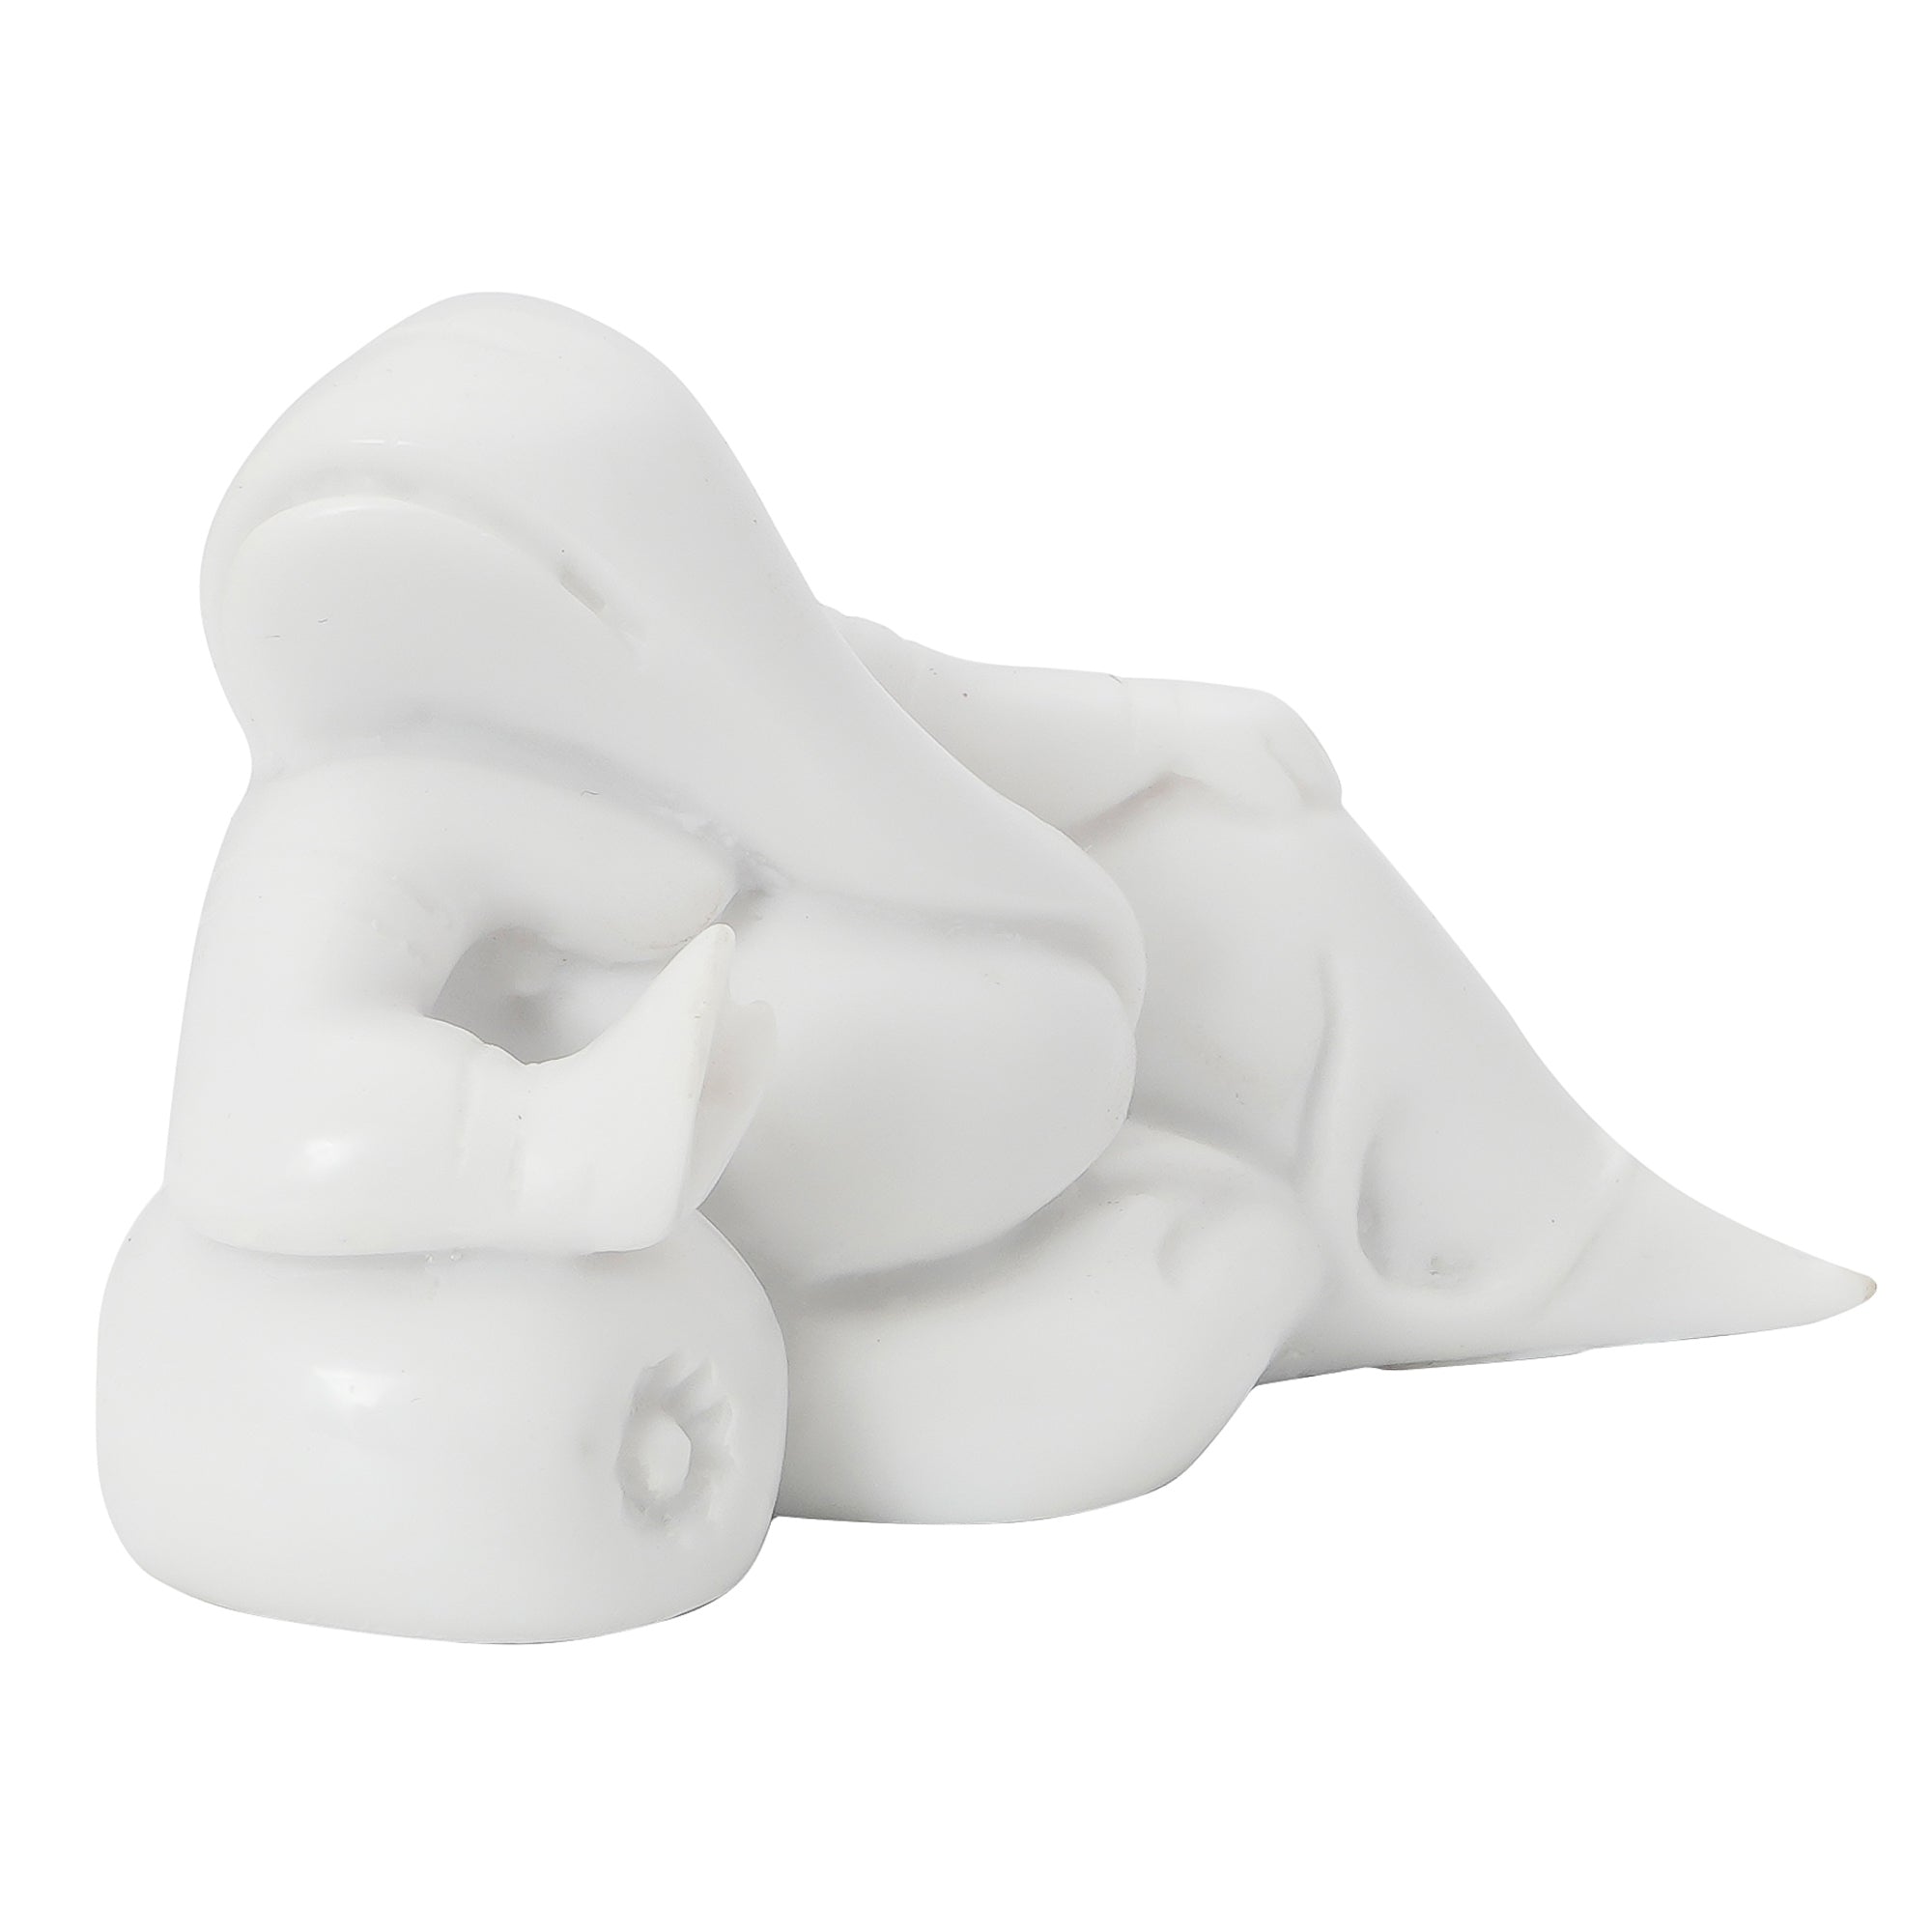 Pure White Resting Lord Ganesha Idol for Home/Temple/Office/Car Dashboard 4